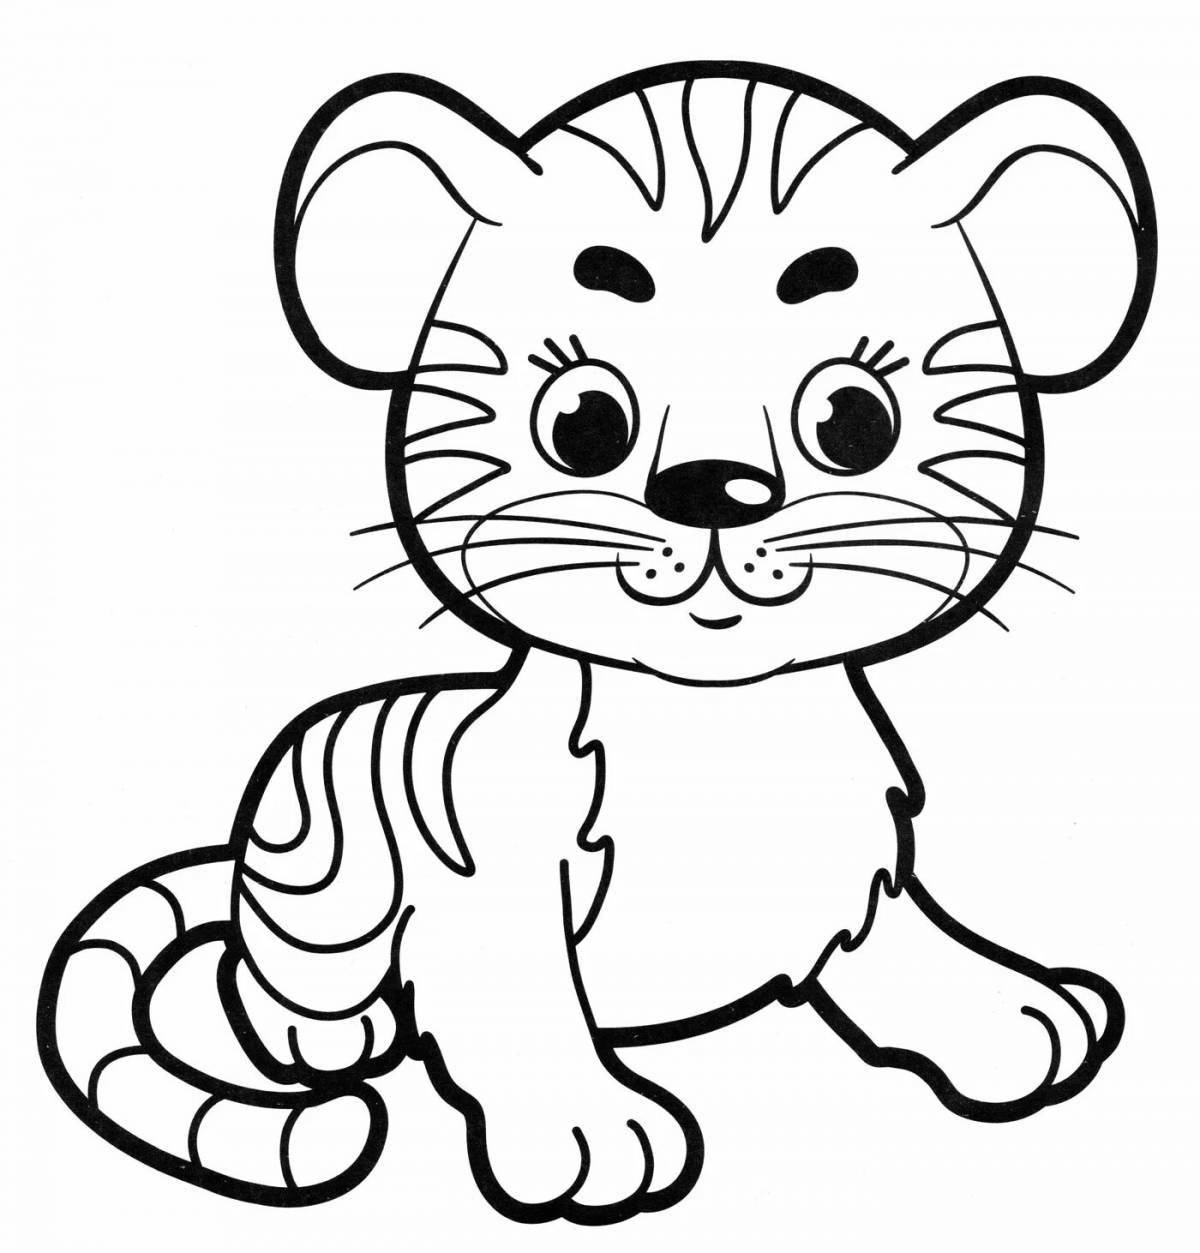 Brave tiger coloring pages for kids